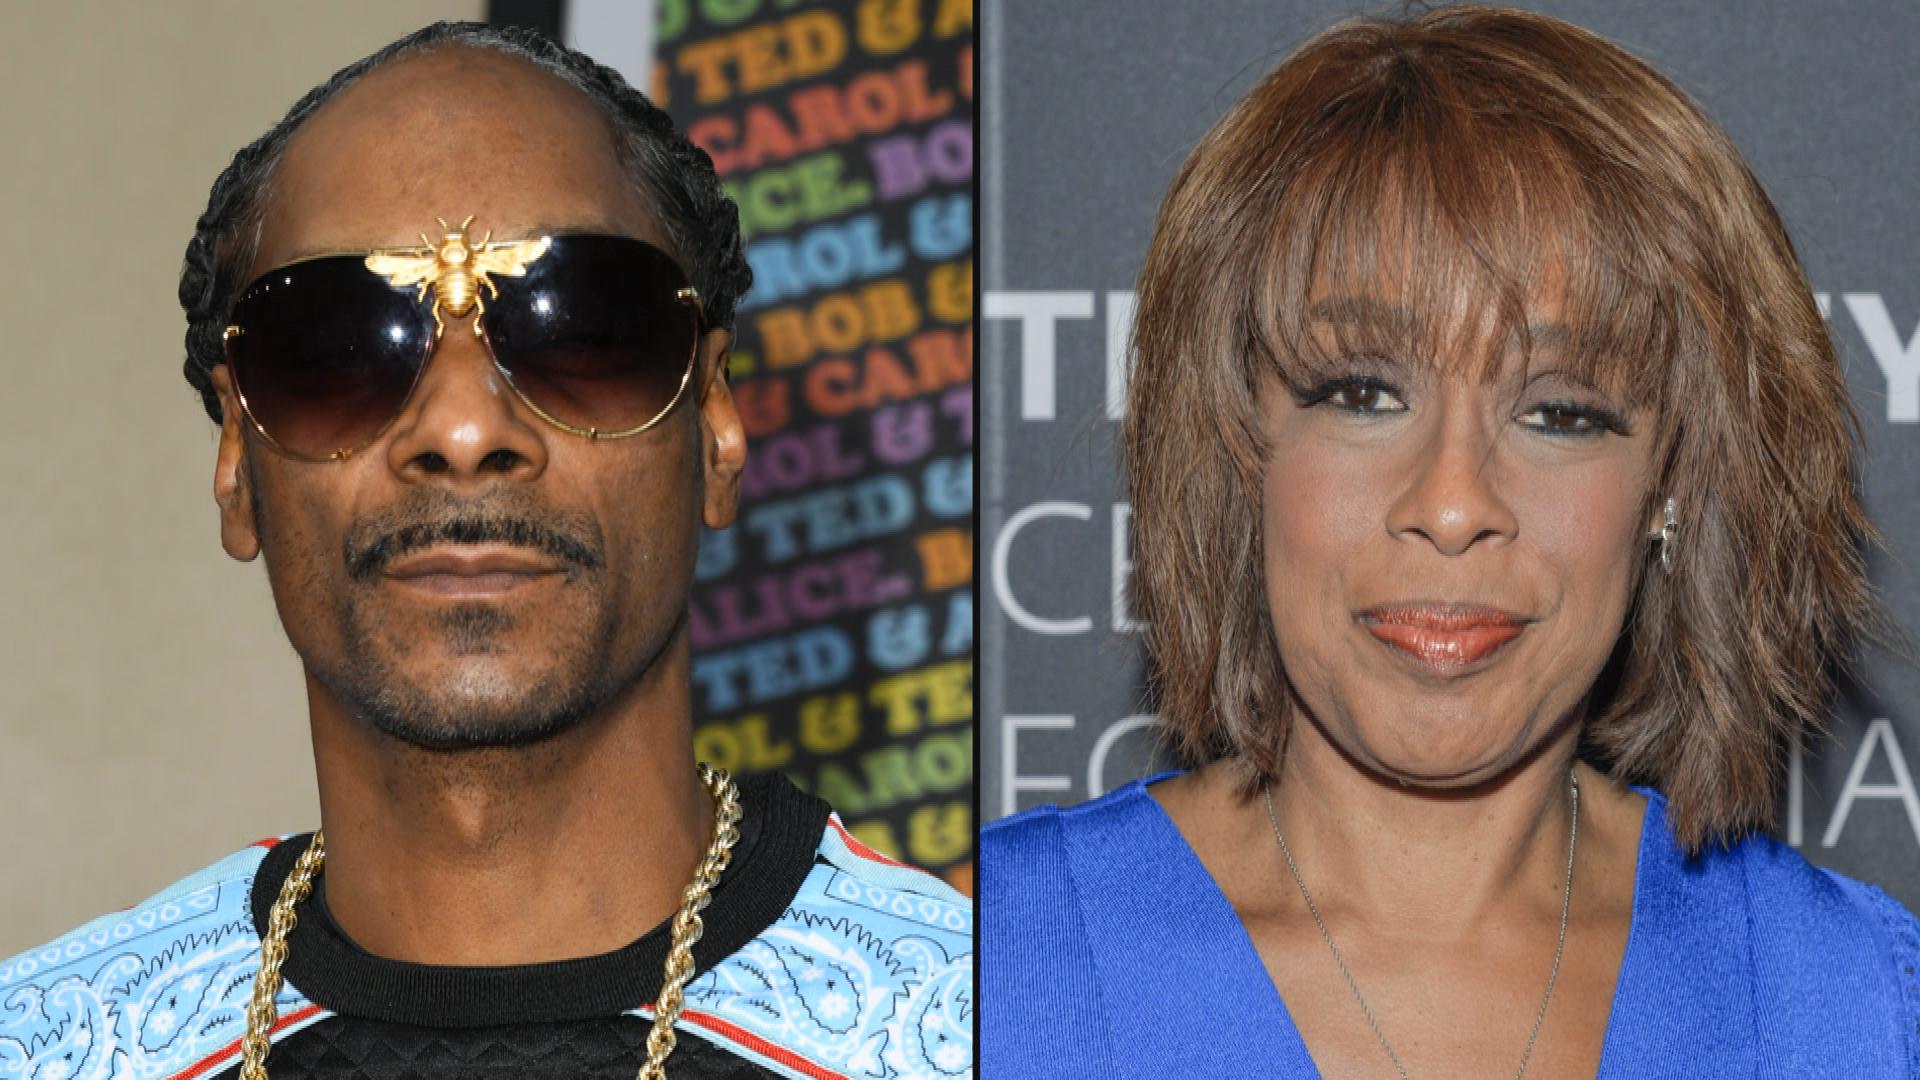 Snoop Dogg says he did not threaten Gayle King